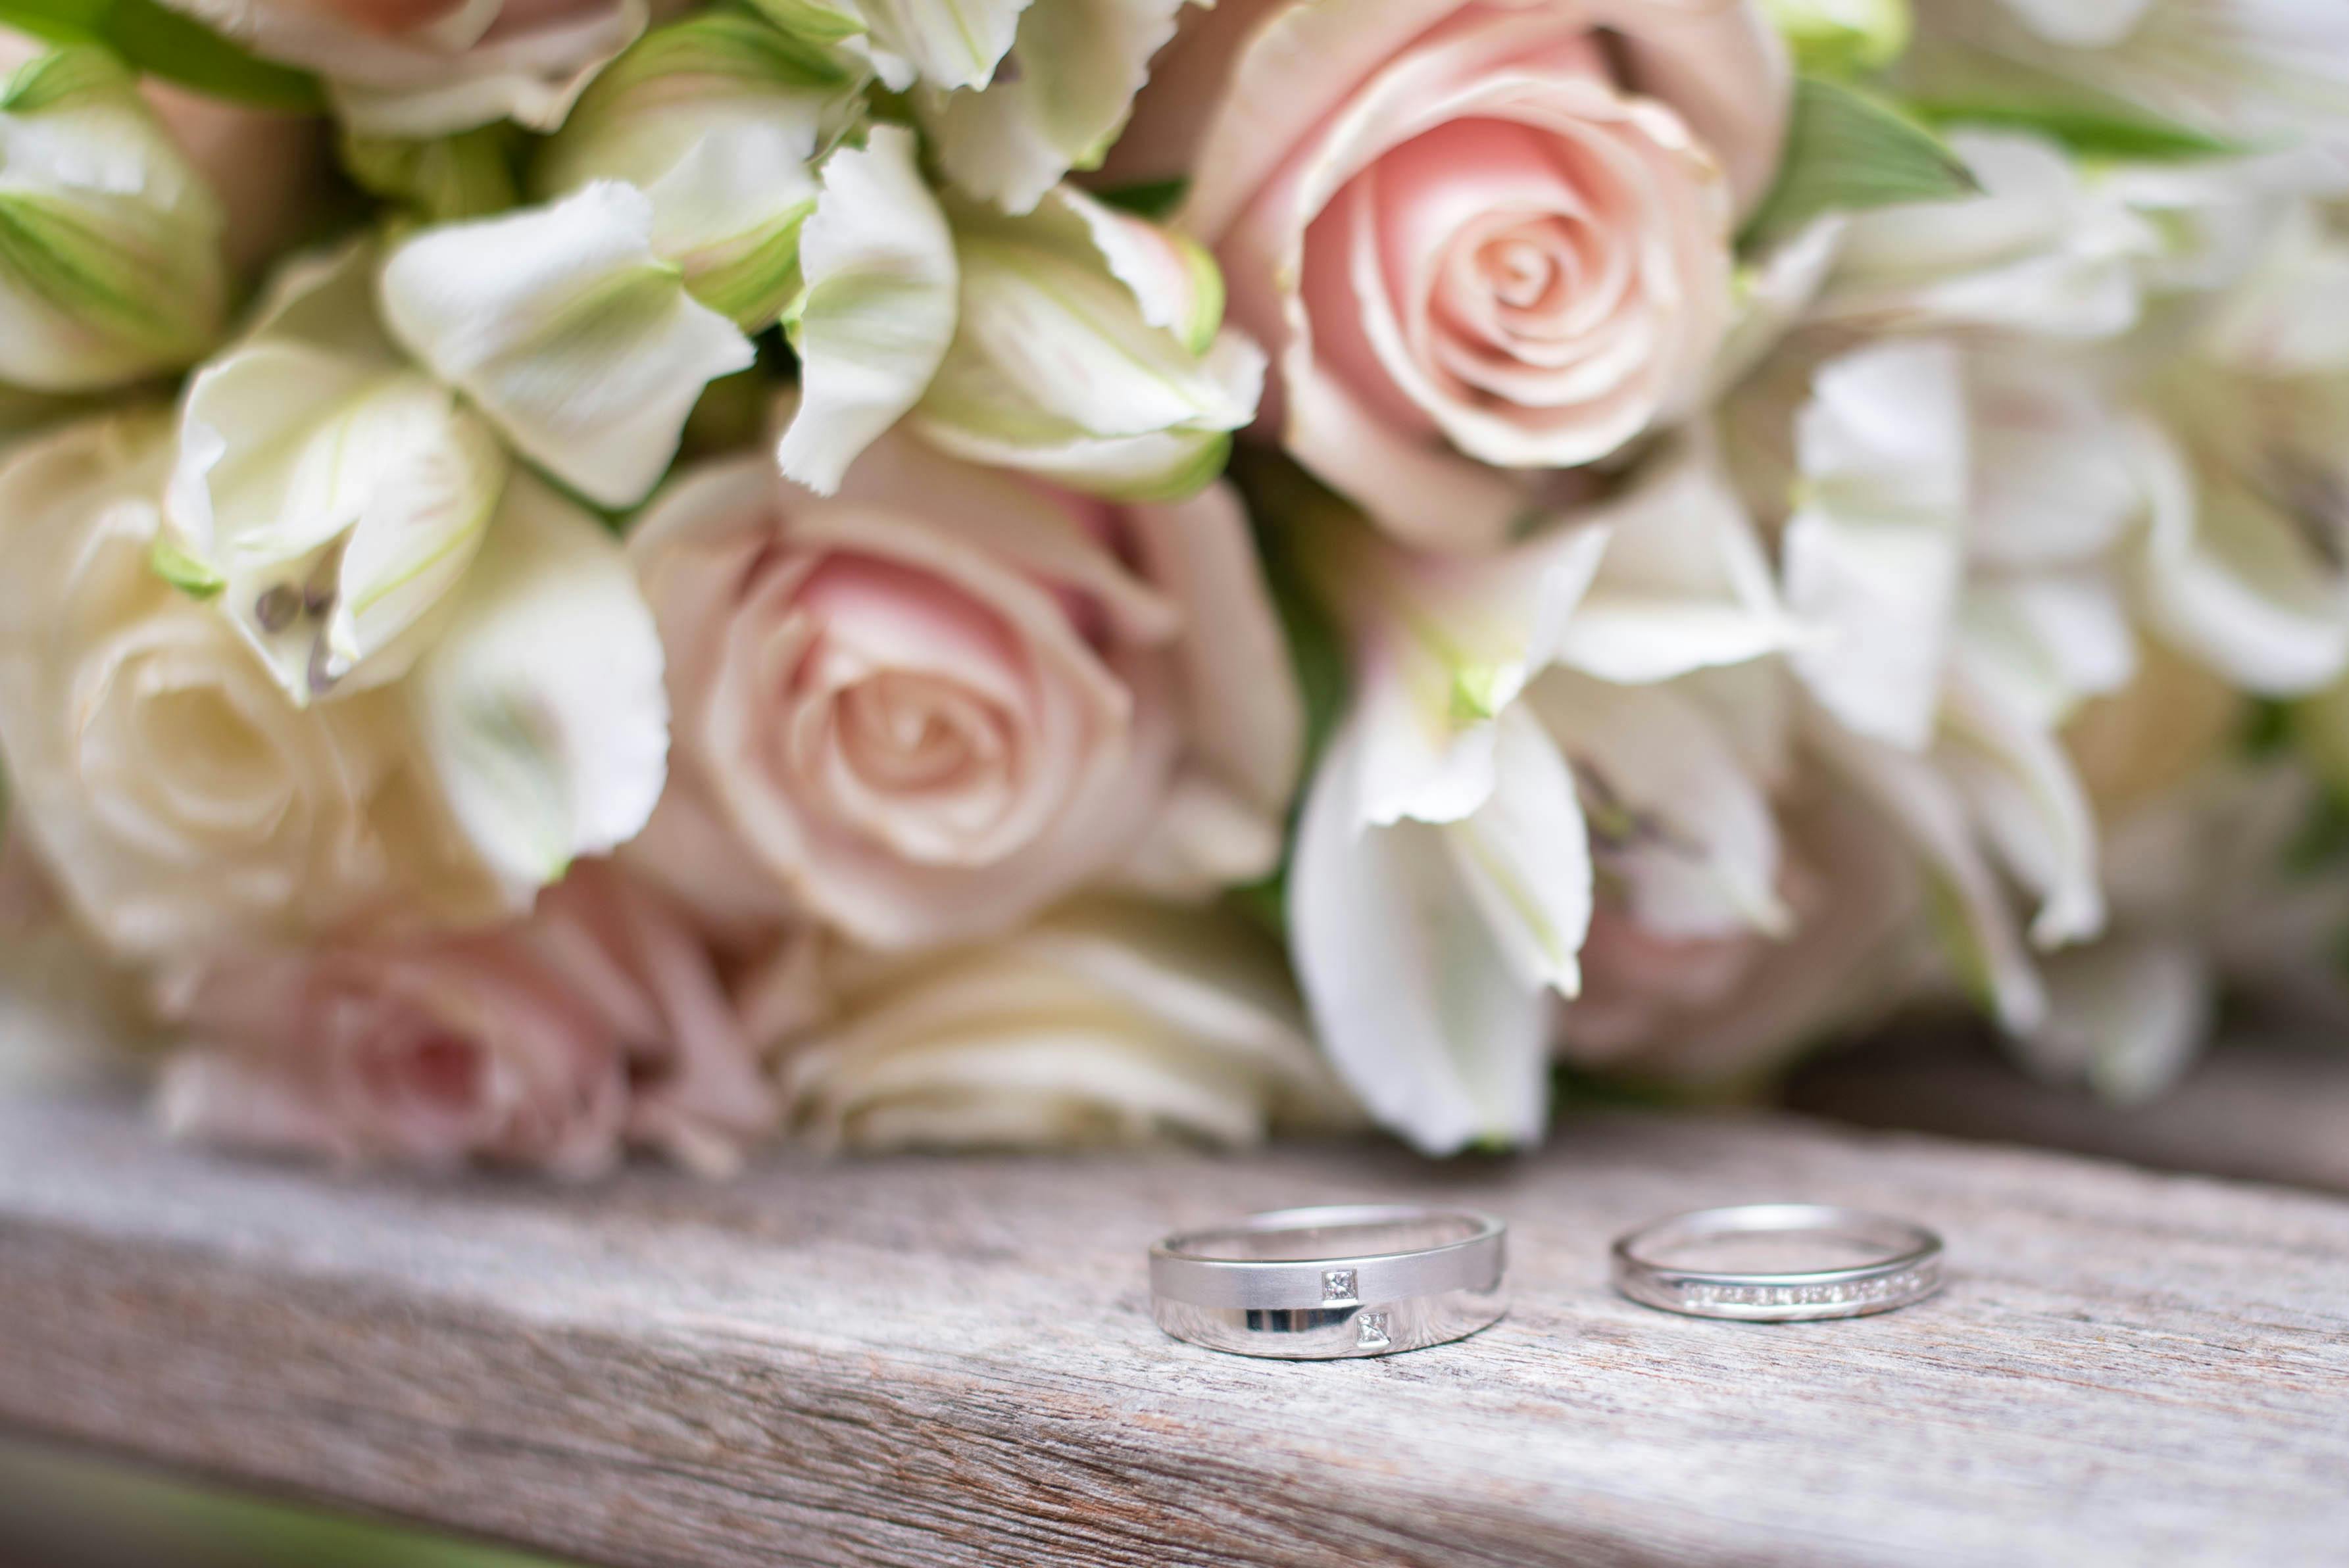 Composition of elegant wedding rings with diamonds on wooden surface ...